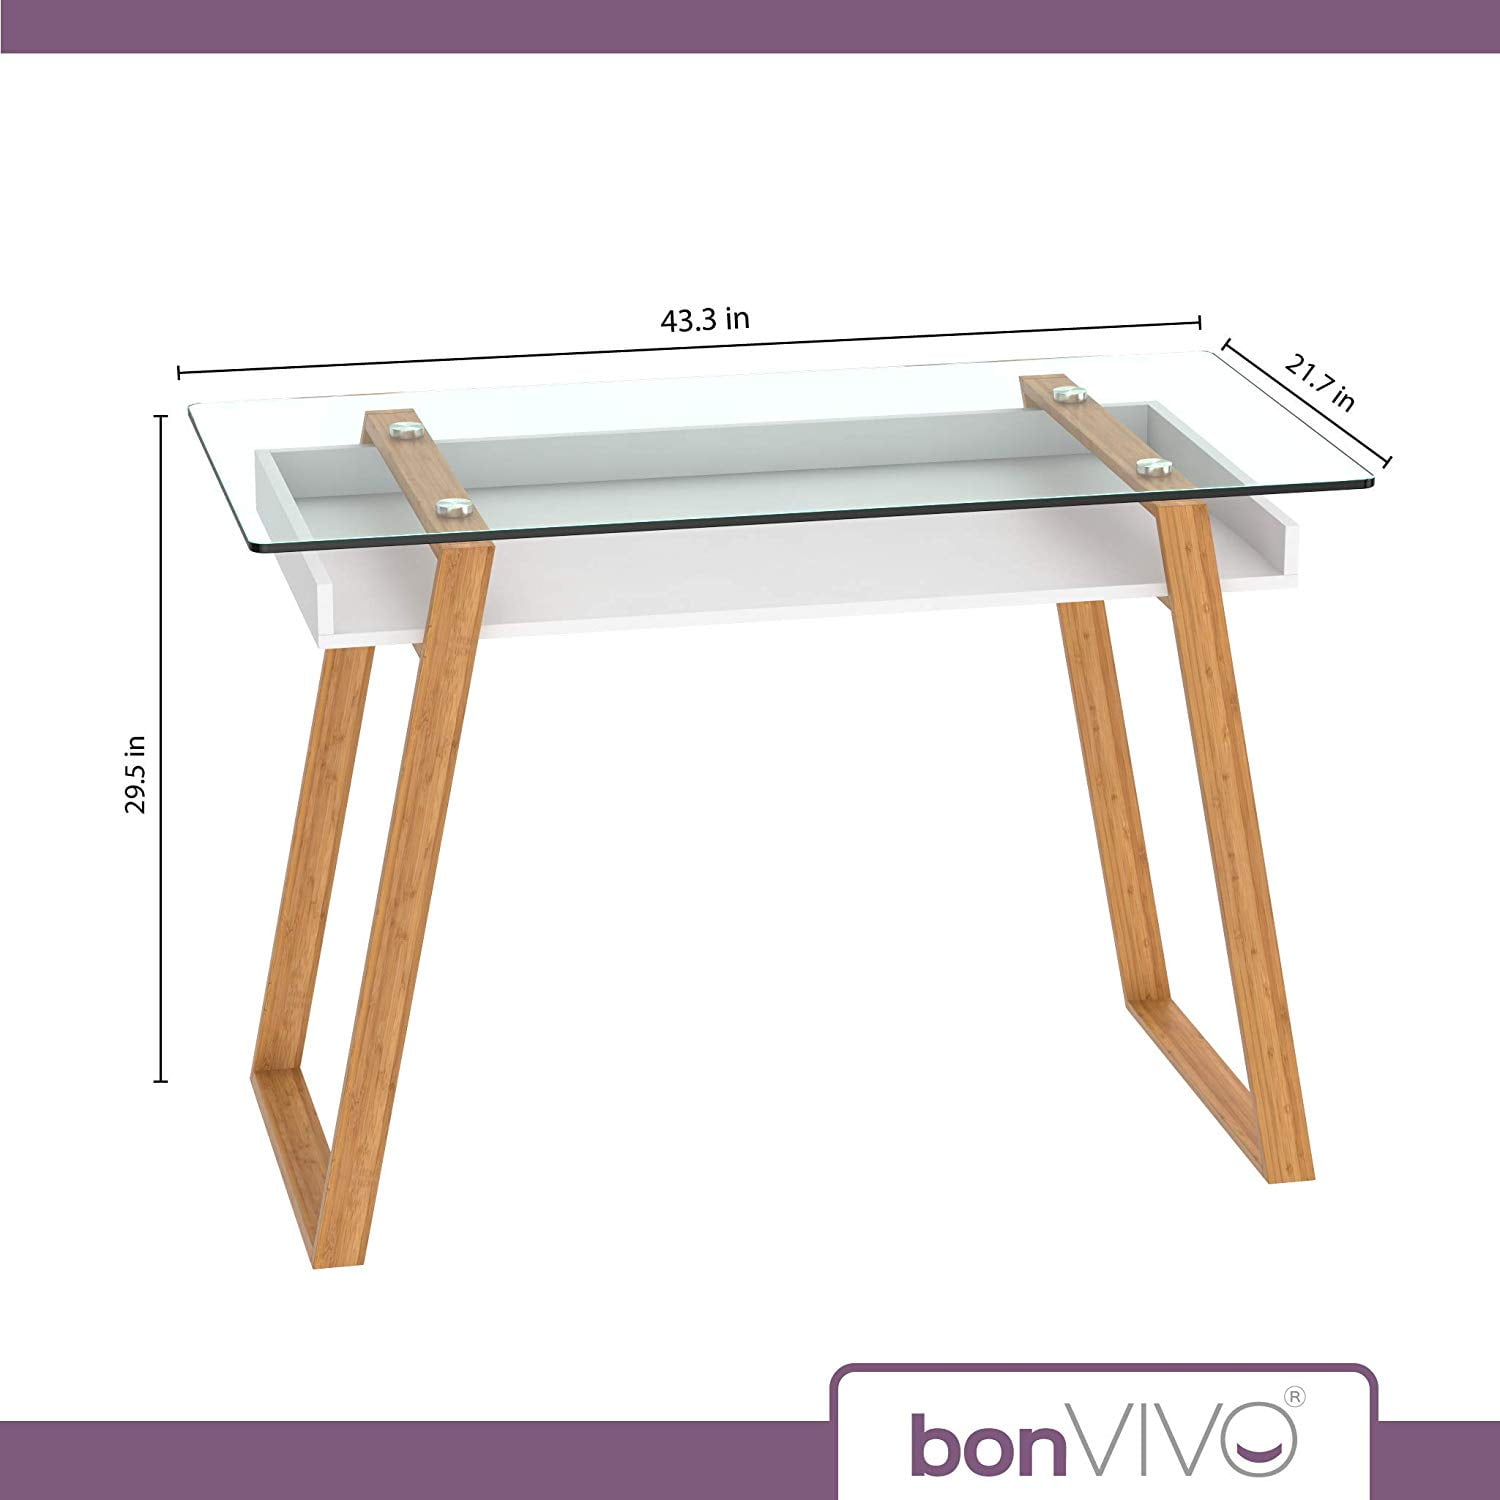  bonVIVO Massimo Small Desk - 43 Inch, Modern Computer Desk for  Small Spaces, Living Room, Office and Bedroom - Study Table w/Glass Top and  Shelf Space - White : Home & Kitchen